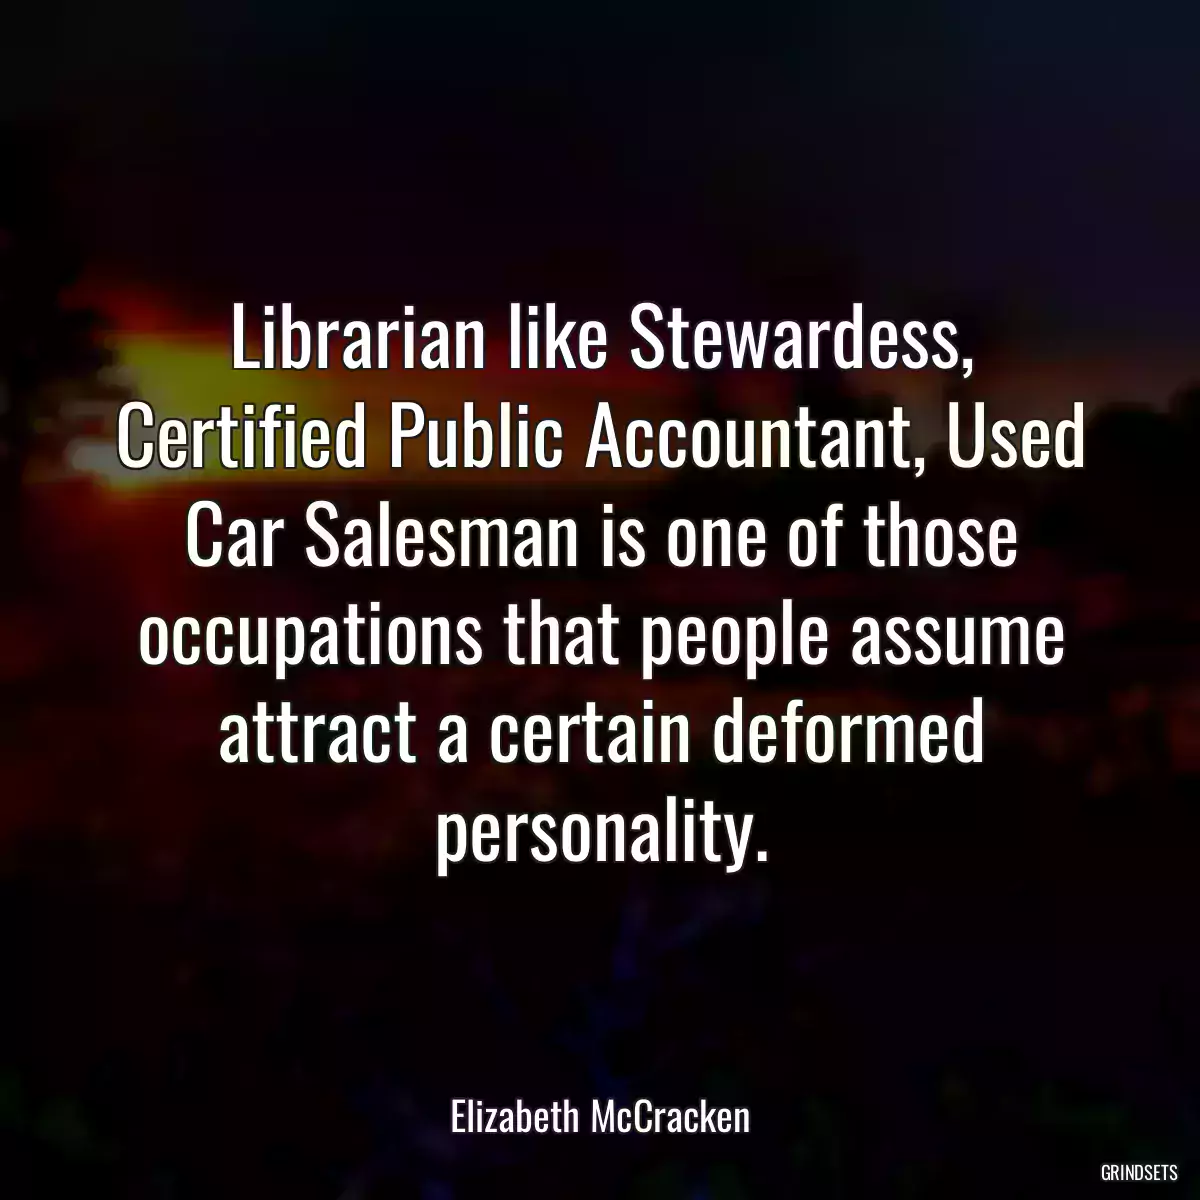 Librarian like Stewardess, Certified Public Accountant, Used Car Salesman is one of those occupations that people assume attract a certain deformed personality.